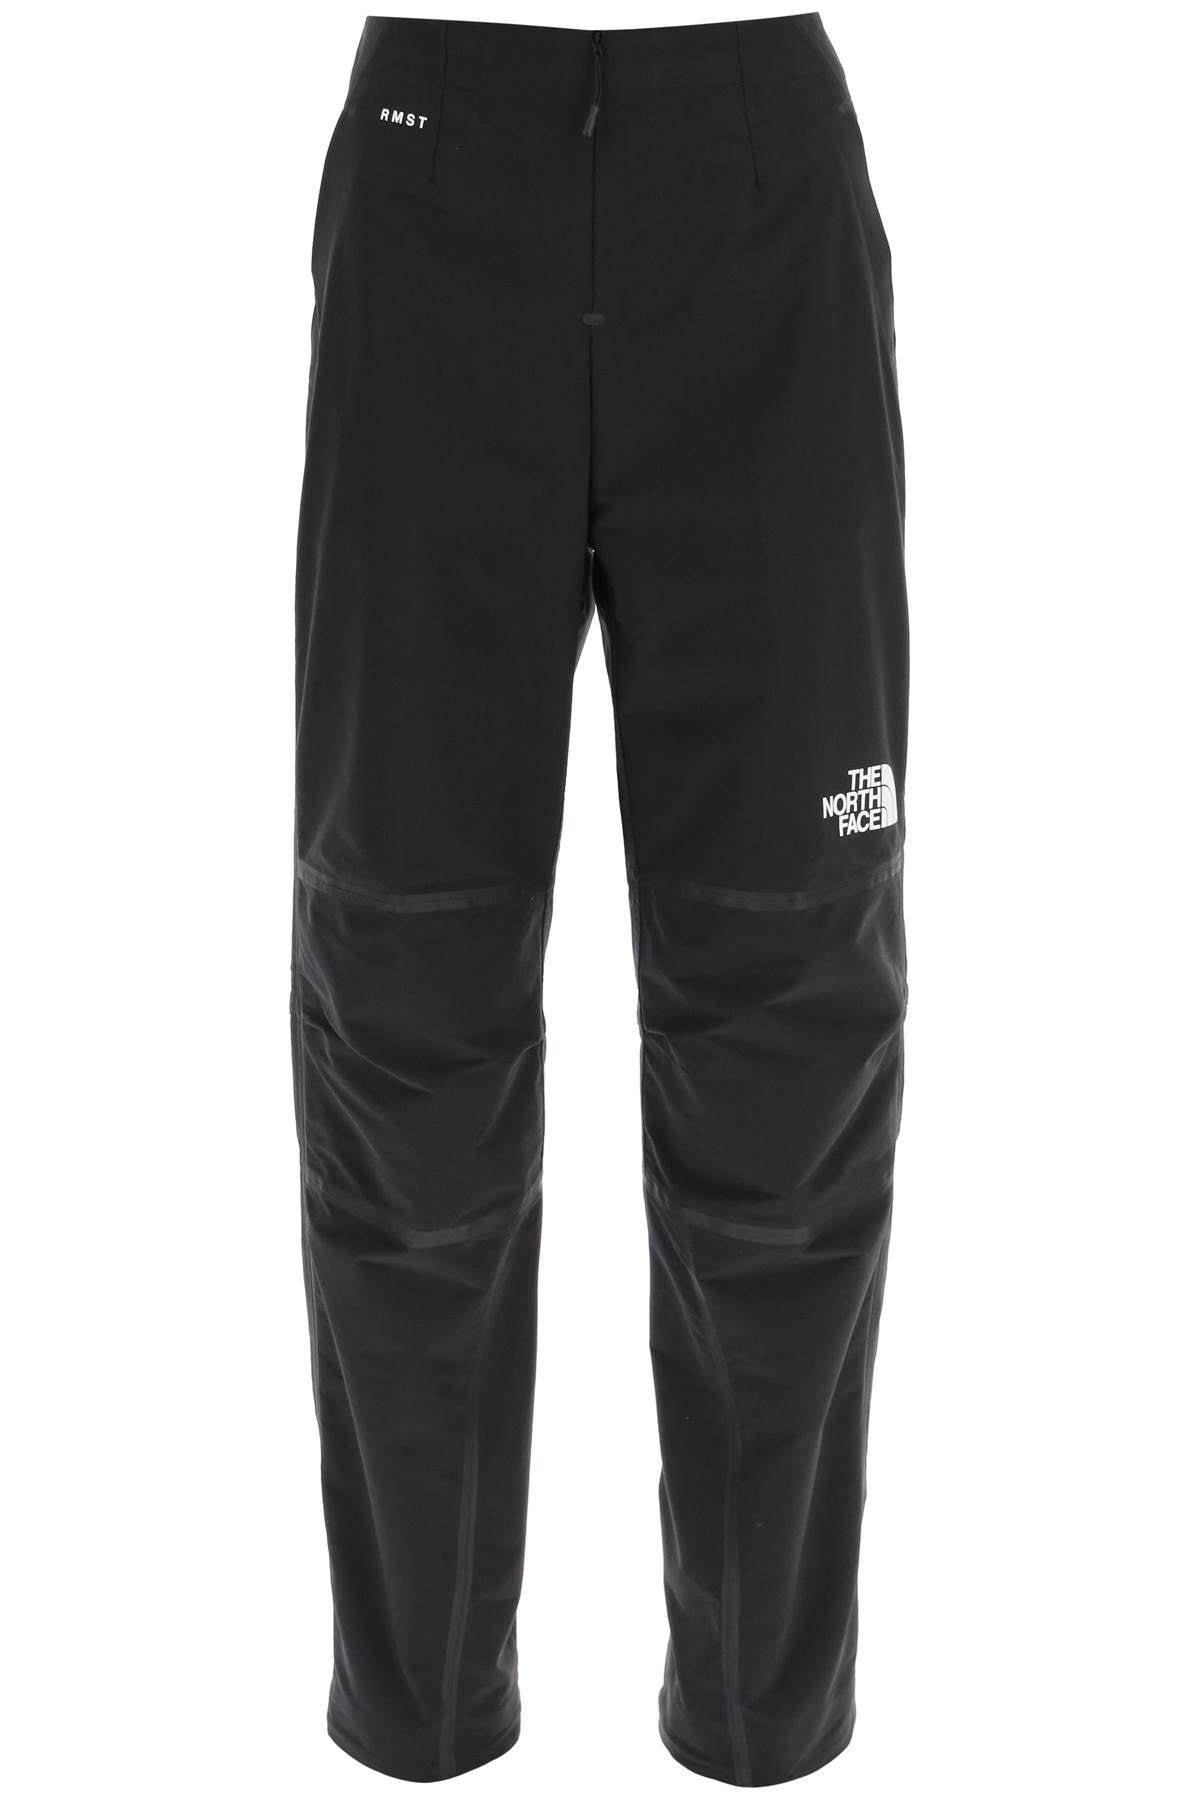 The North Face Ski Snoga insulated trousers in black | ASOS